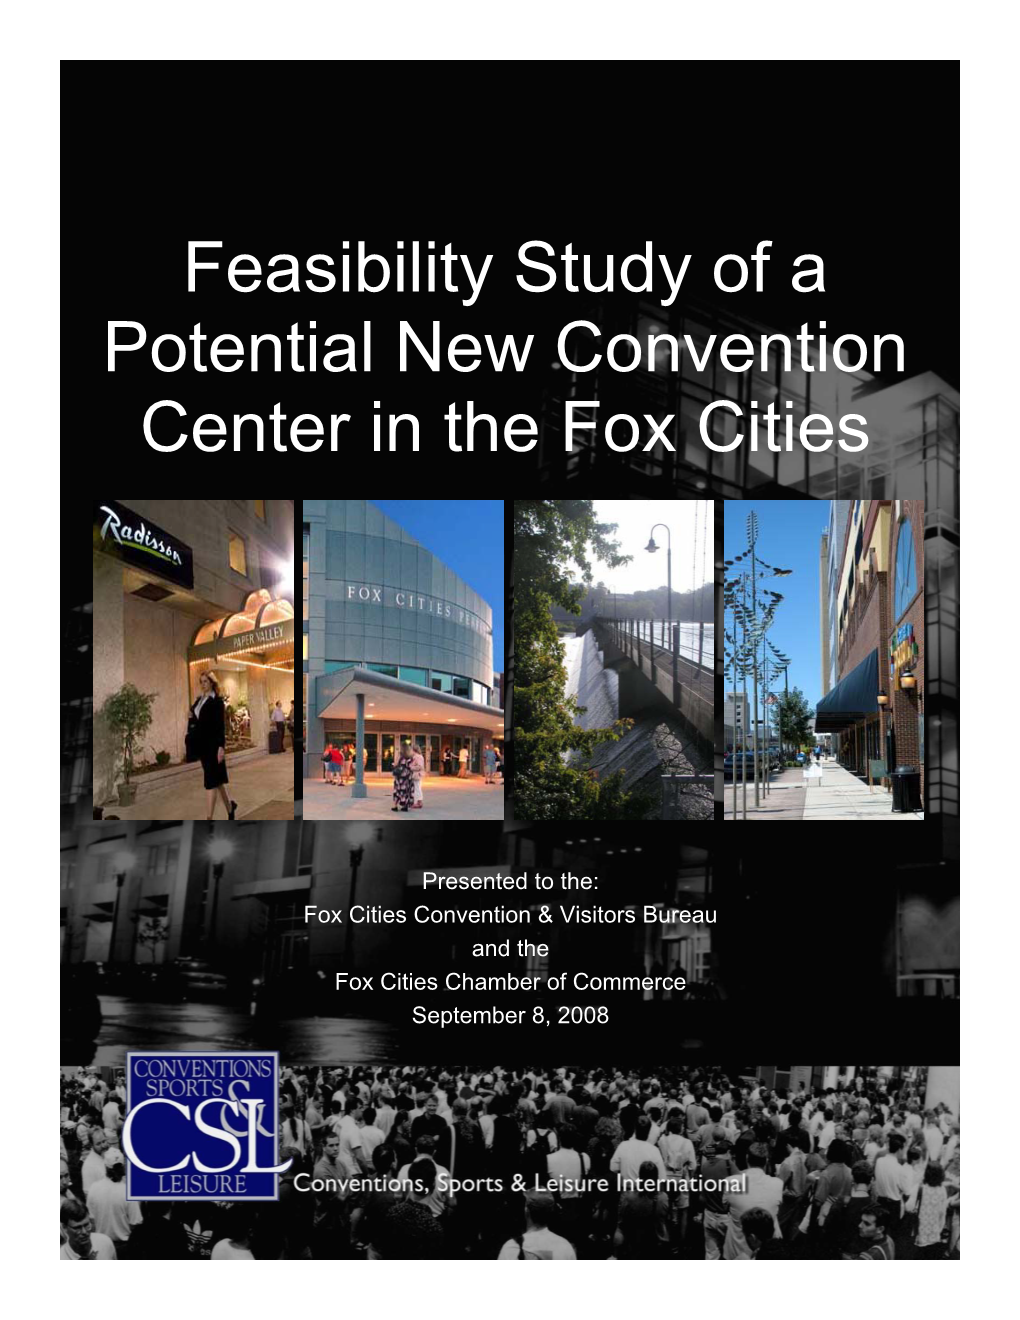 Feasibility Study of a Potential New Convention Center in the Fox Cities